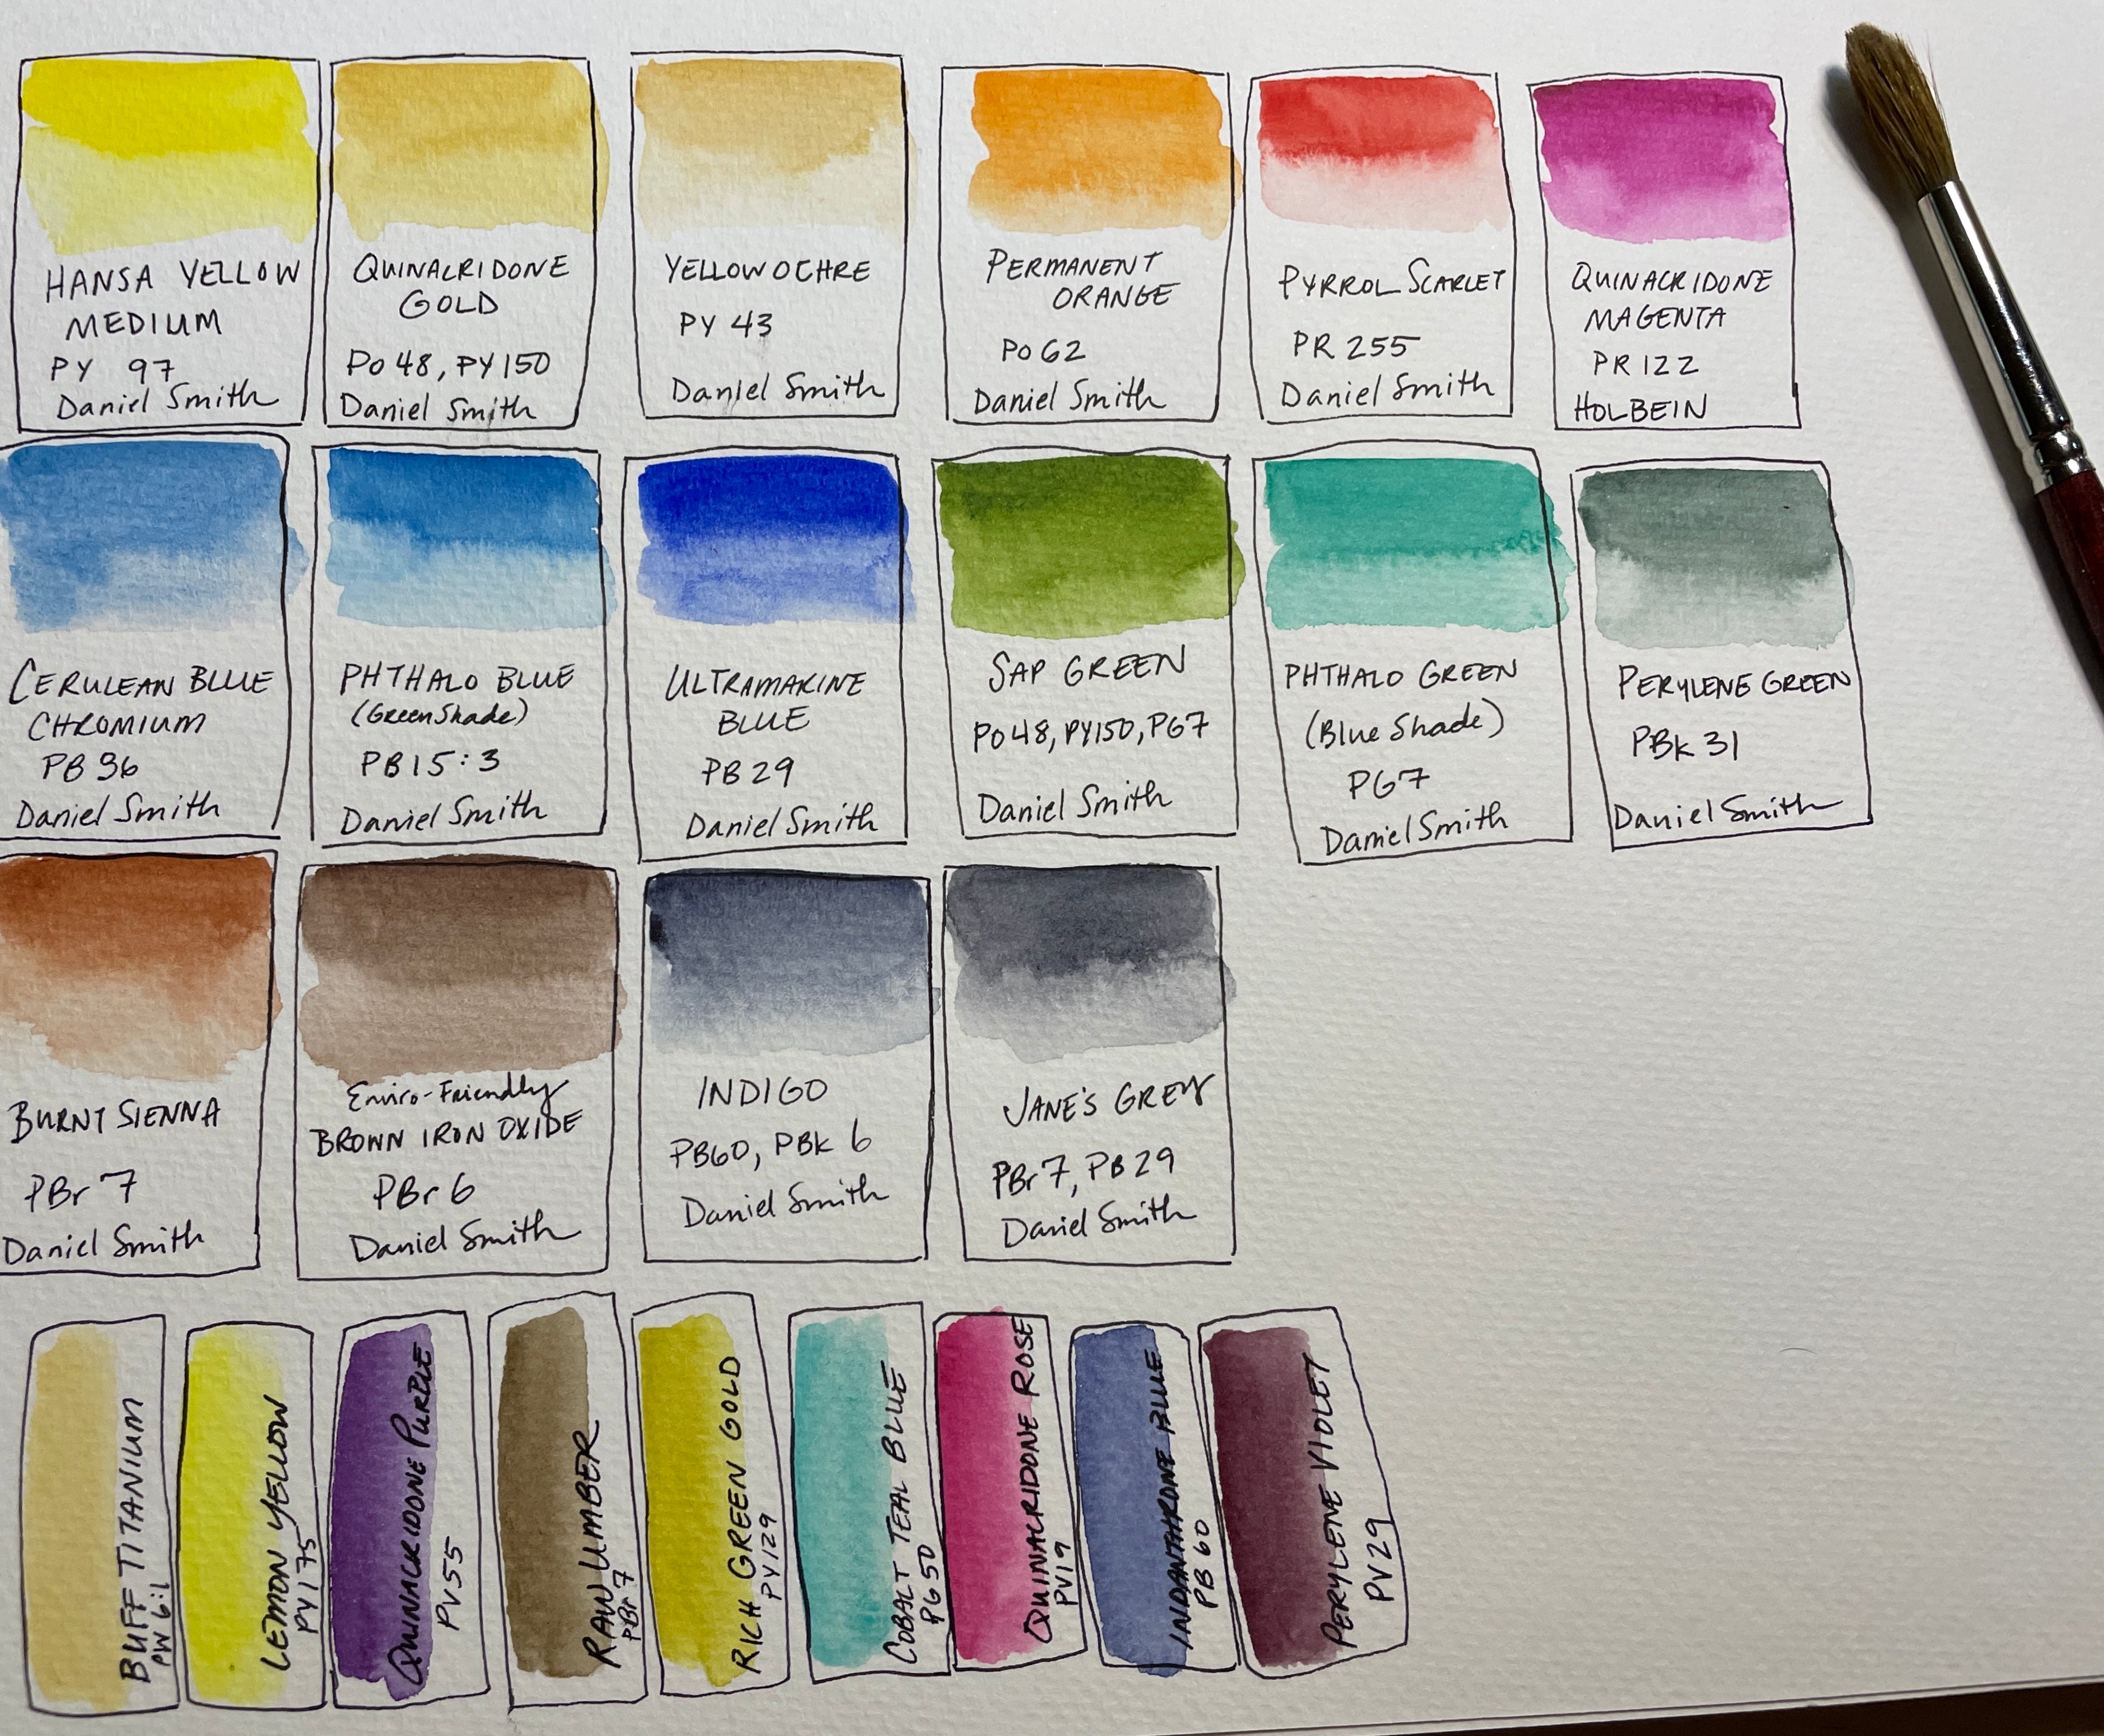 St. Petersburg White Nights Watercolors 36 Pans Review 